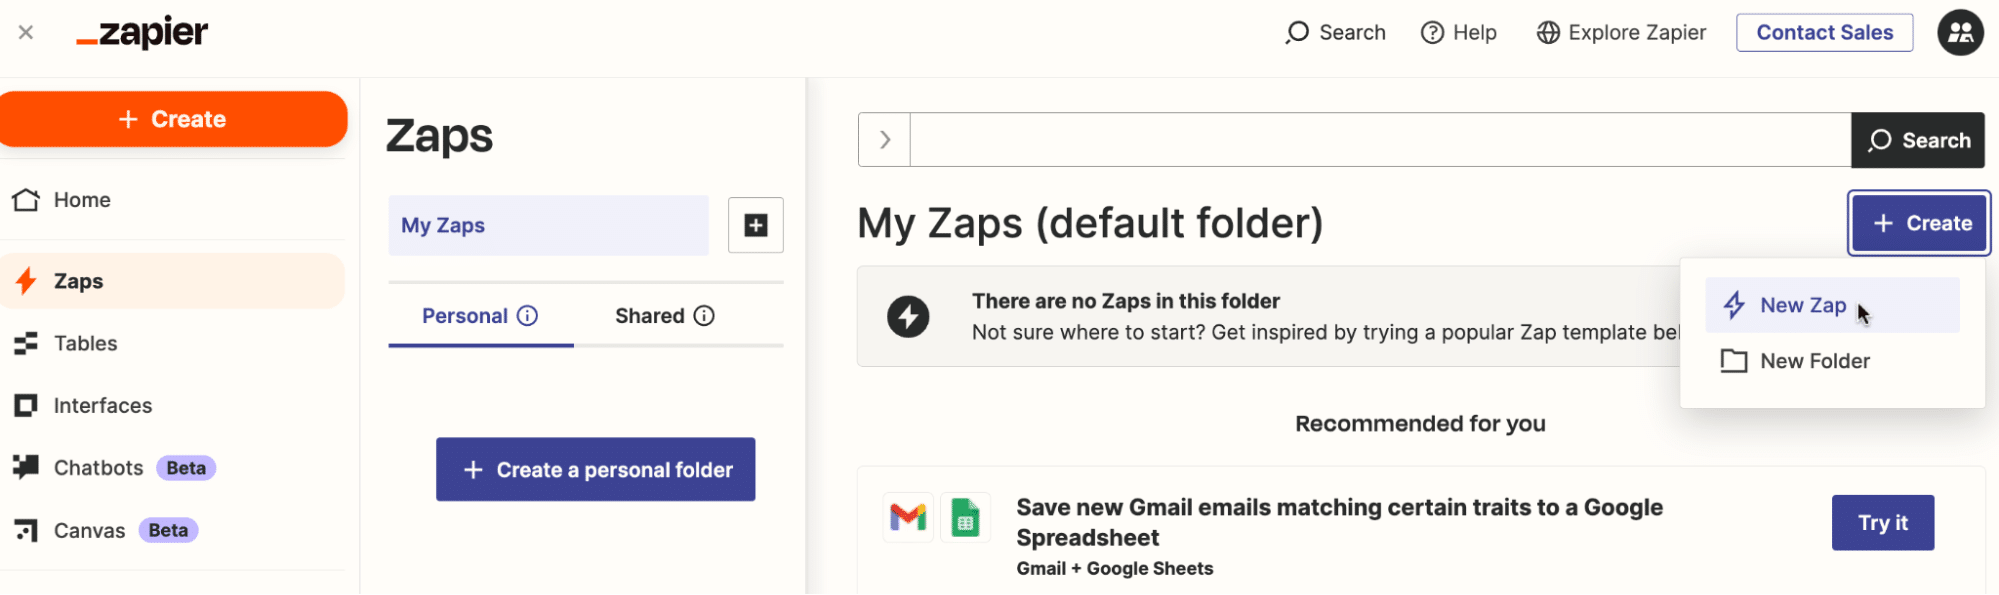 Image showing the initial screen on Zapier with the '+ Create' > 'New Zap' button highlighted.